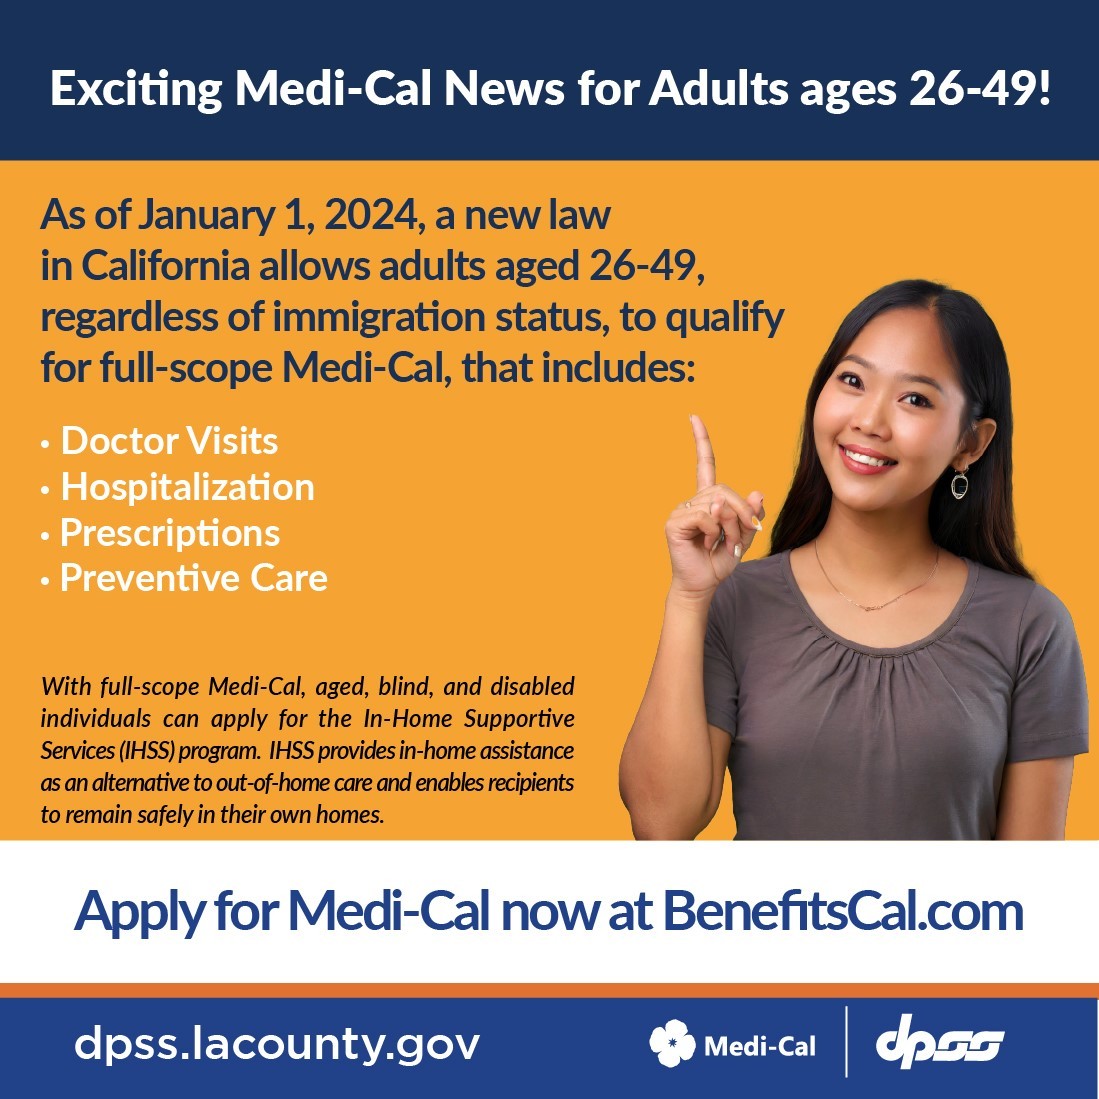 Exciting Medi-Cal News for Adults ages 26-49!  As of January 1, 2024, a new law in California allows adults aged 26-49, regardless of immigration status, to qualify for full-scope Medi-Cal, that includes: Doctor Visits, Hospitalization, Prescription, and preventive care.  With full-scope Medi-Cal, aged, blind, and disabled individuals can apply for the In-Home Supportive Services (IHSS) program. IHSS provides in-home assistance as an alternative to out-of-home care and enables recipients to remain safely in their own homes. Apply for Medi-Cal now at BenefitsCal.com.